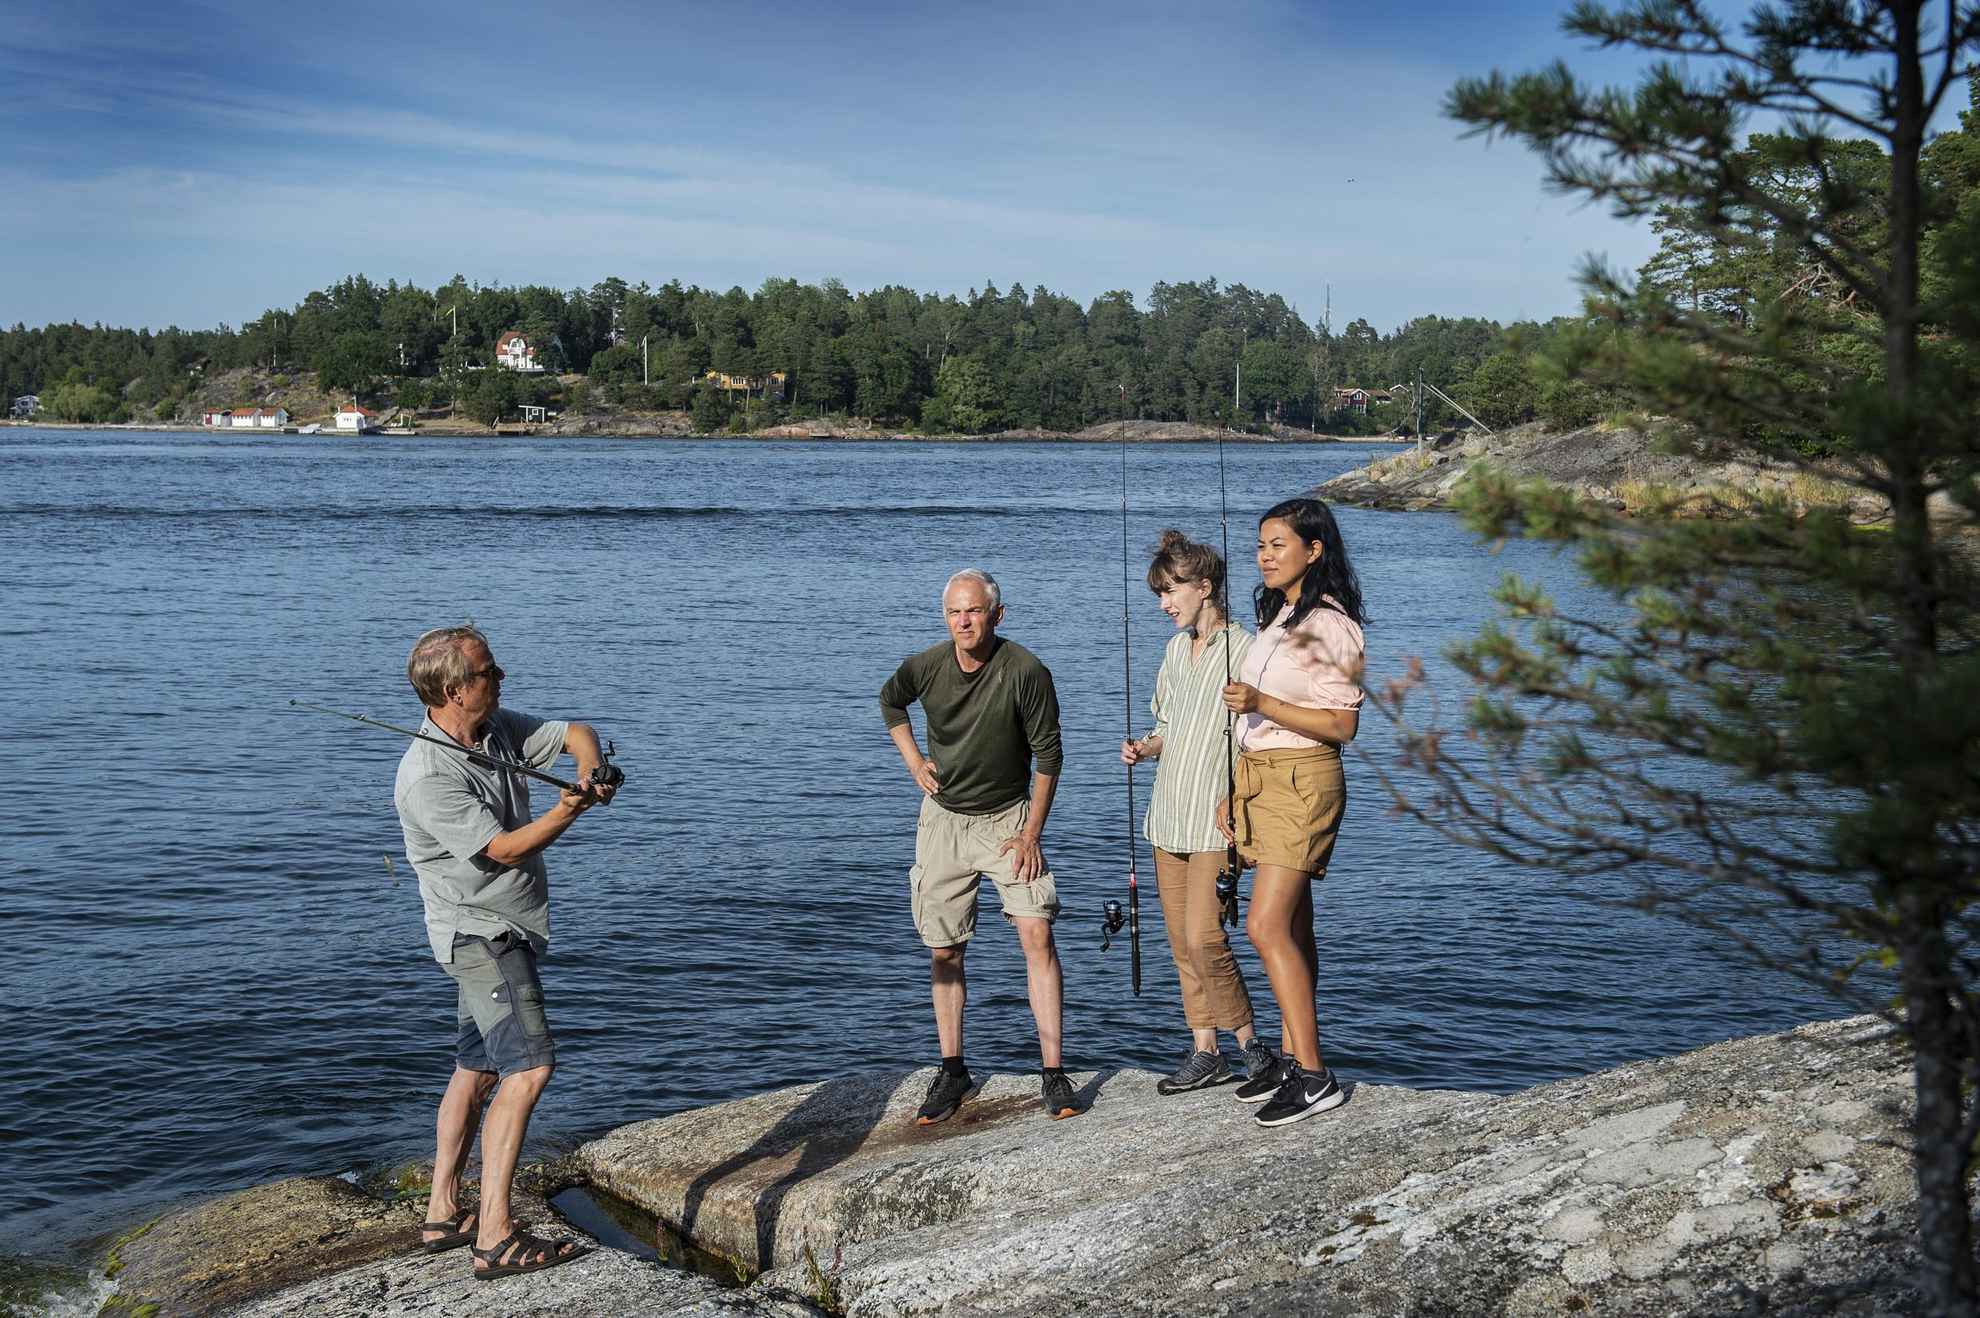 A man is showing another man and two women how to fish on a cliff in the archipelago.